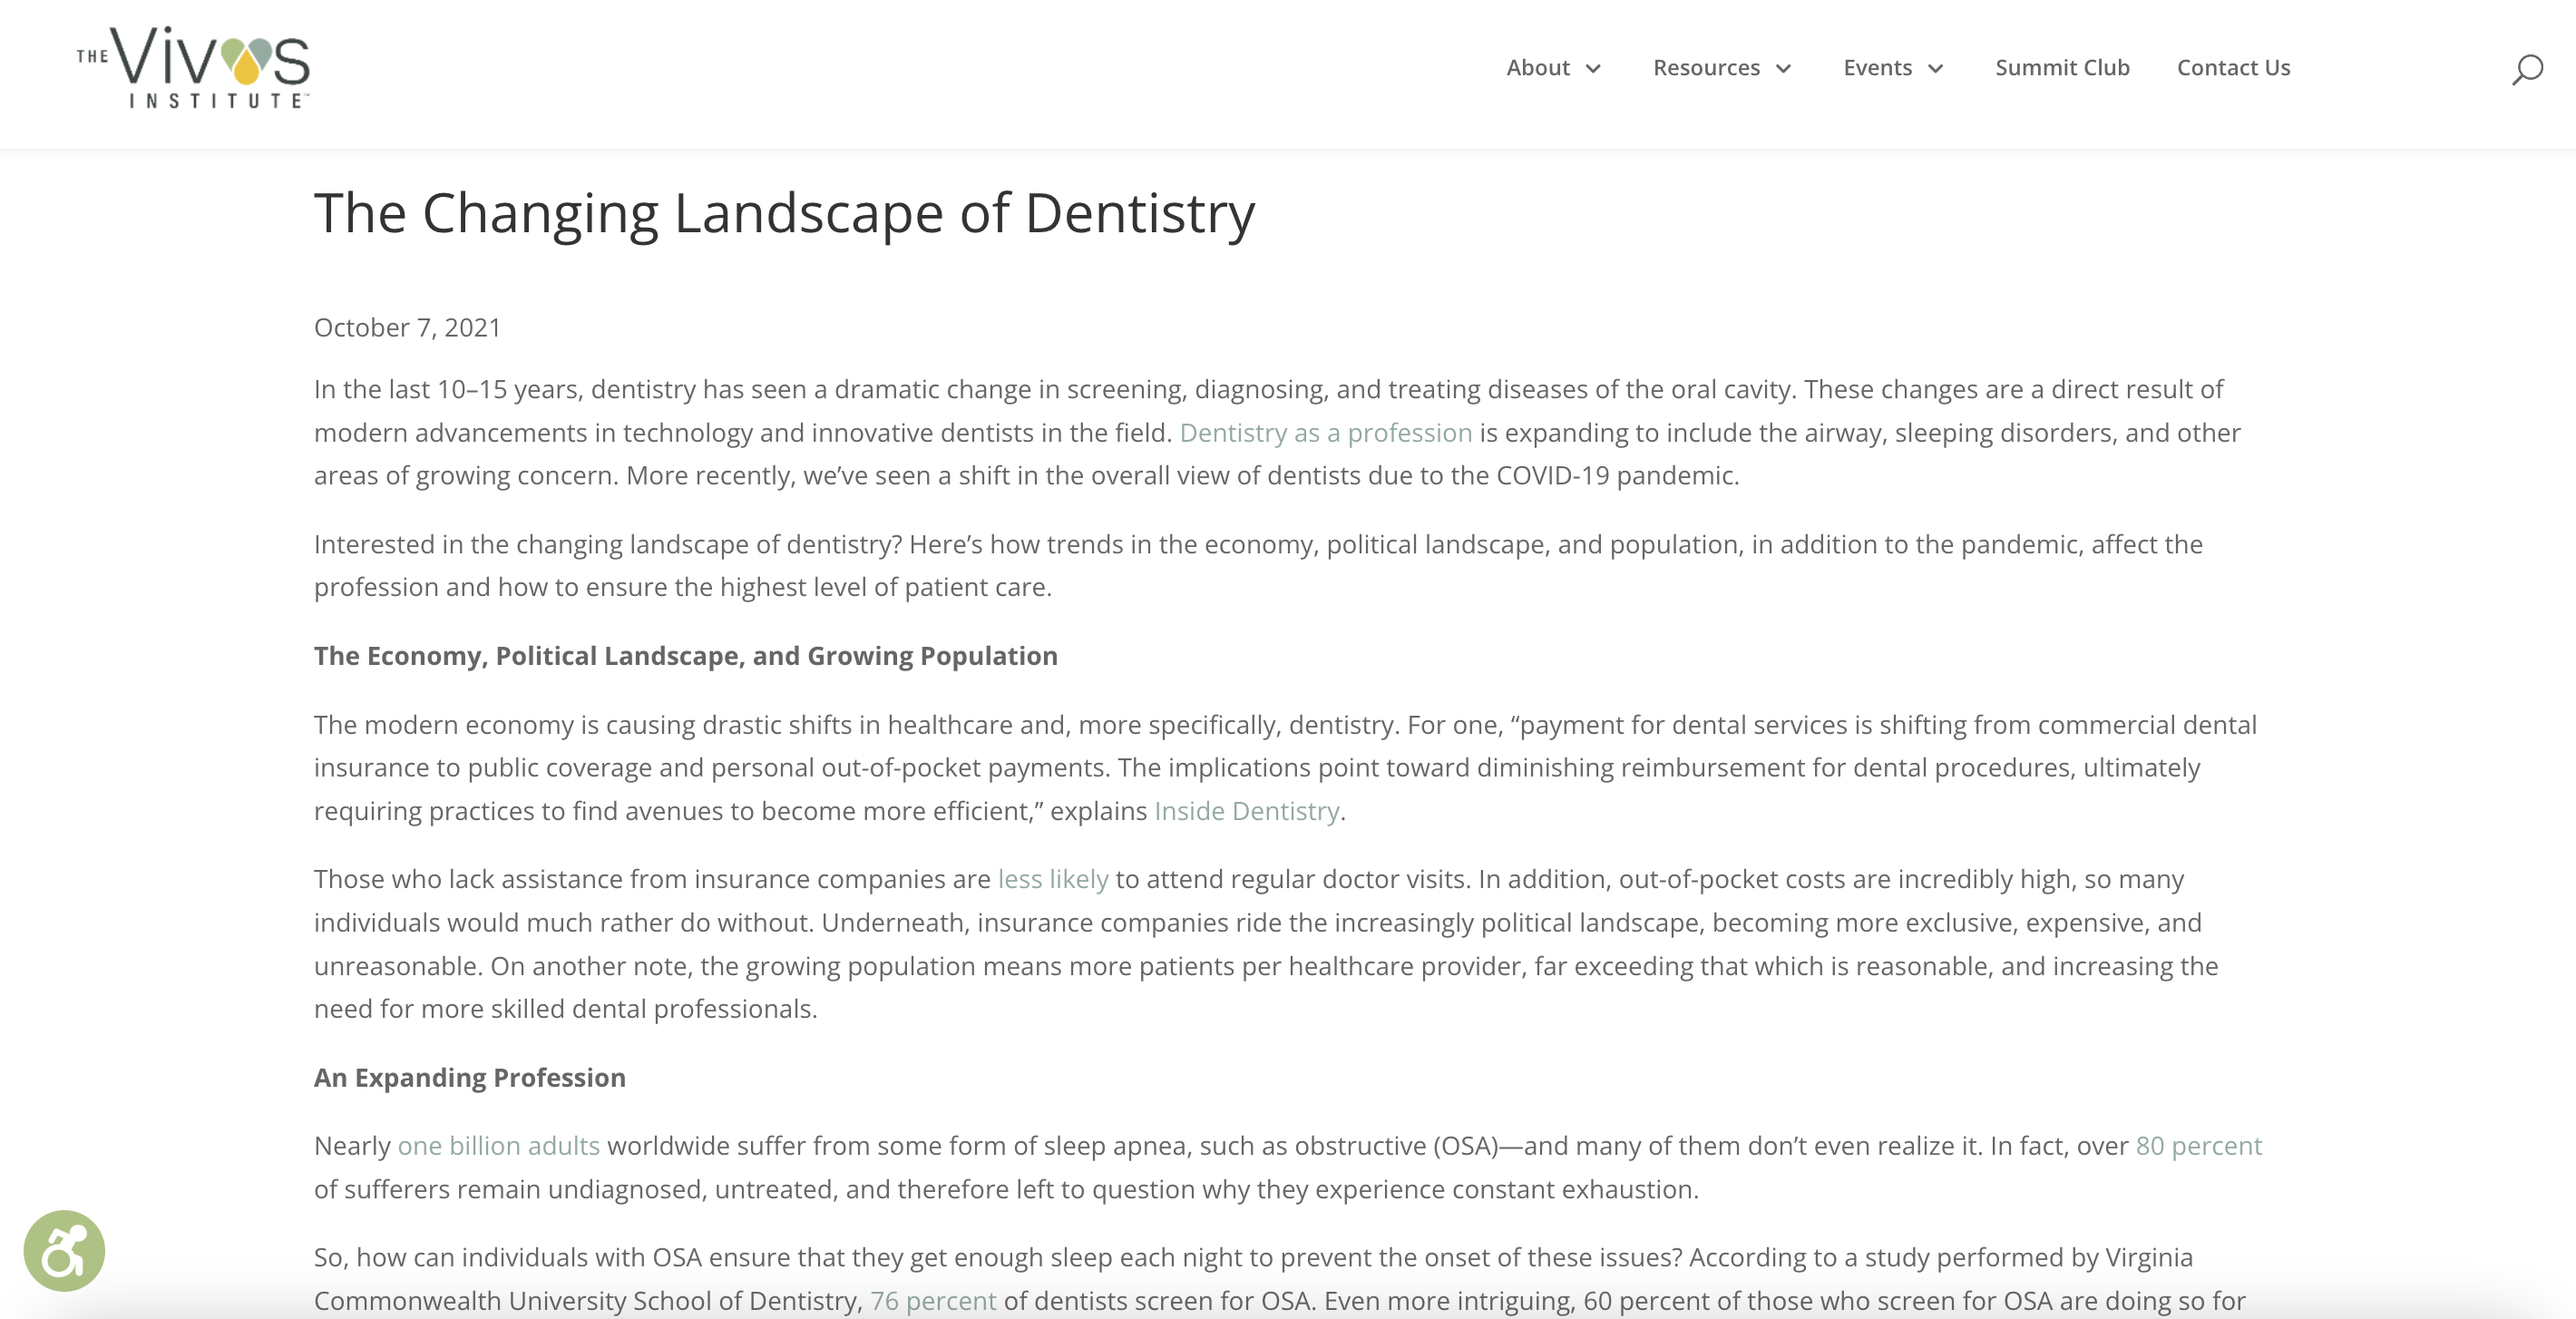 The Changing Landscape of Dentistry